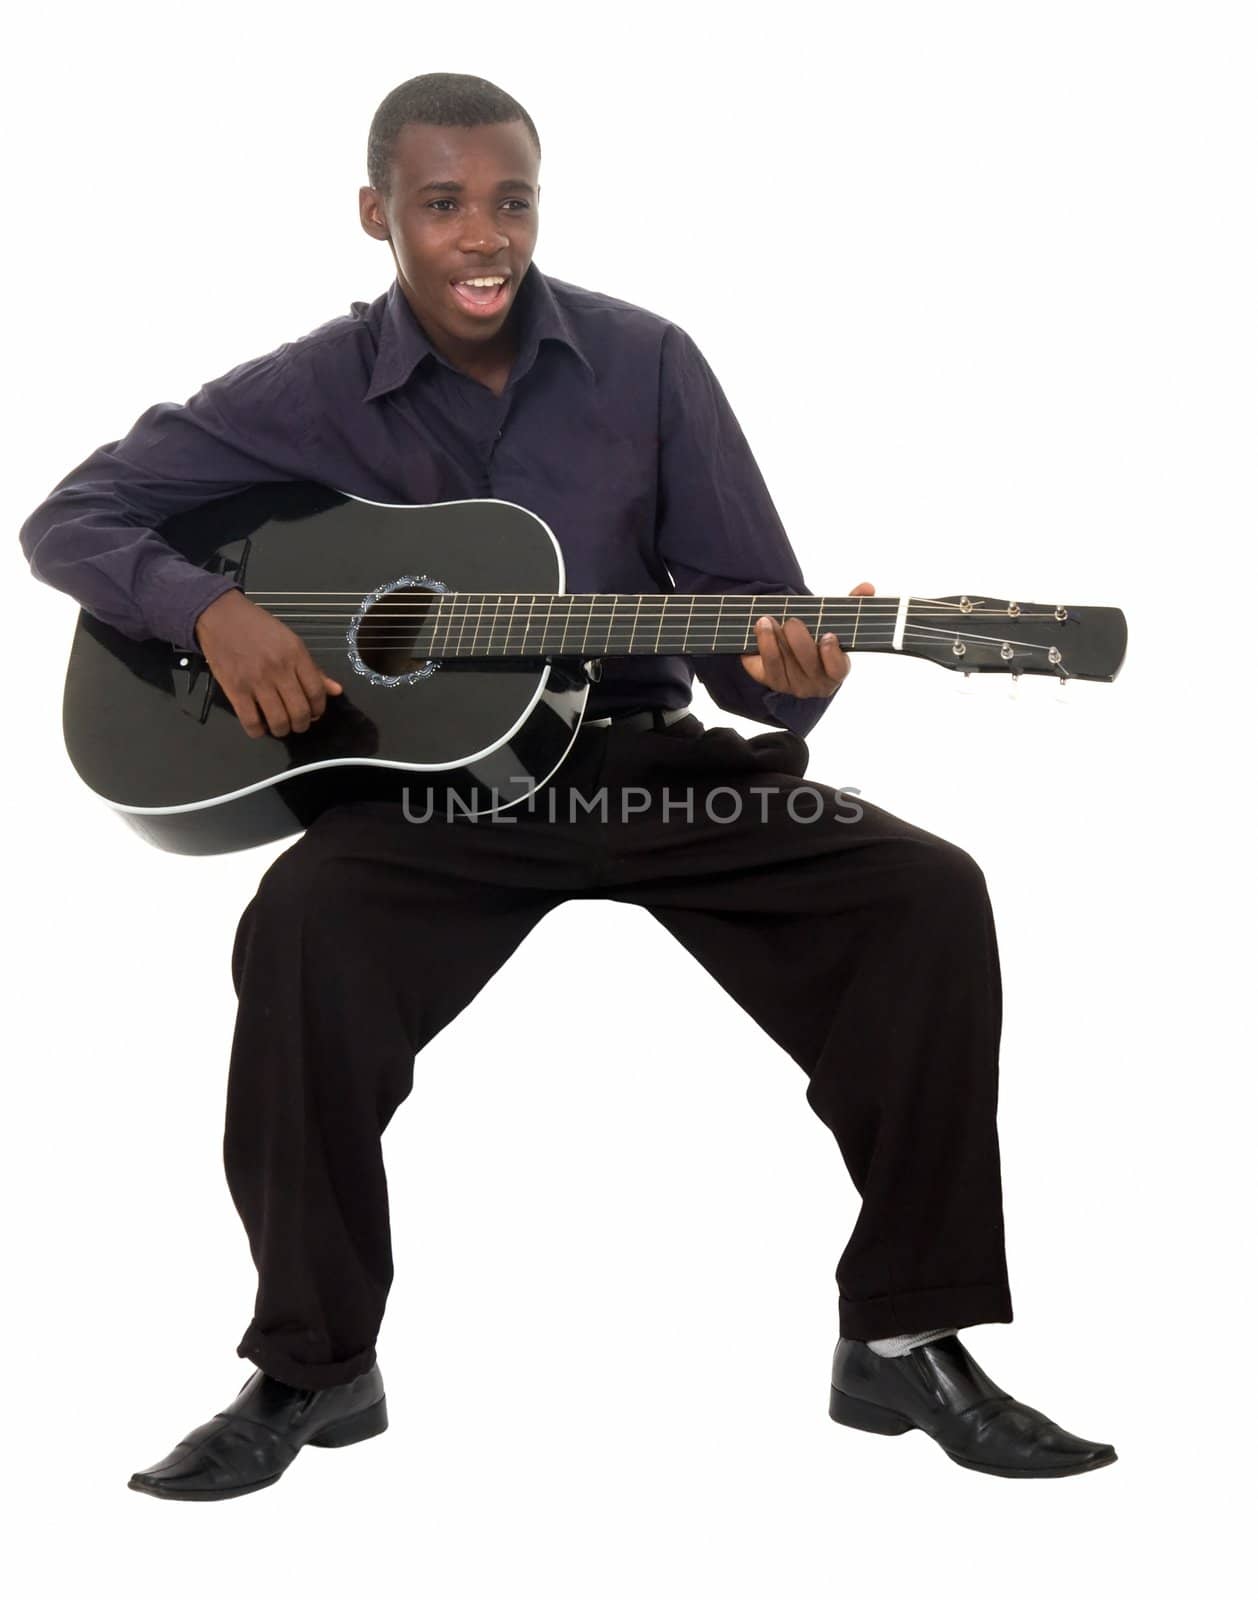 Singing guitarist. The young man with black guitar on a white background.